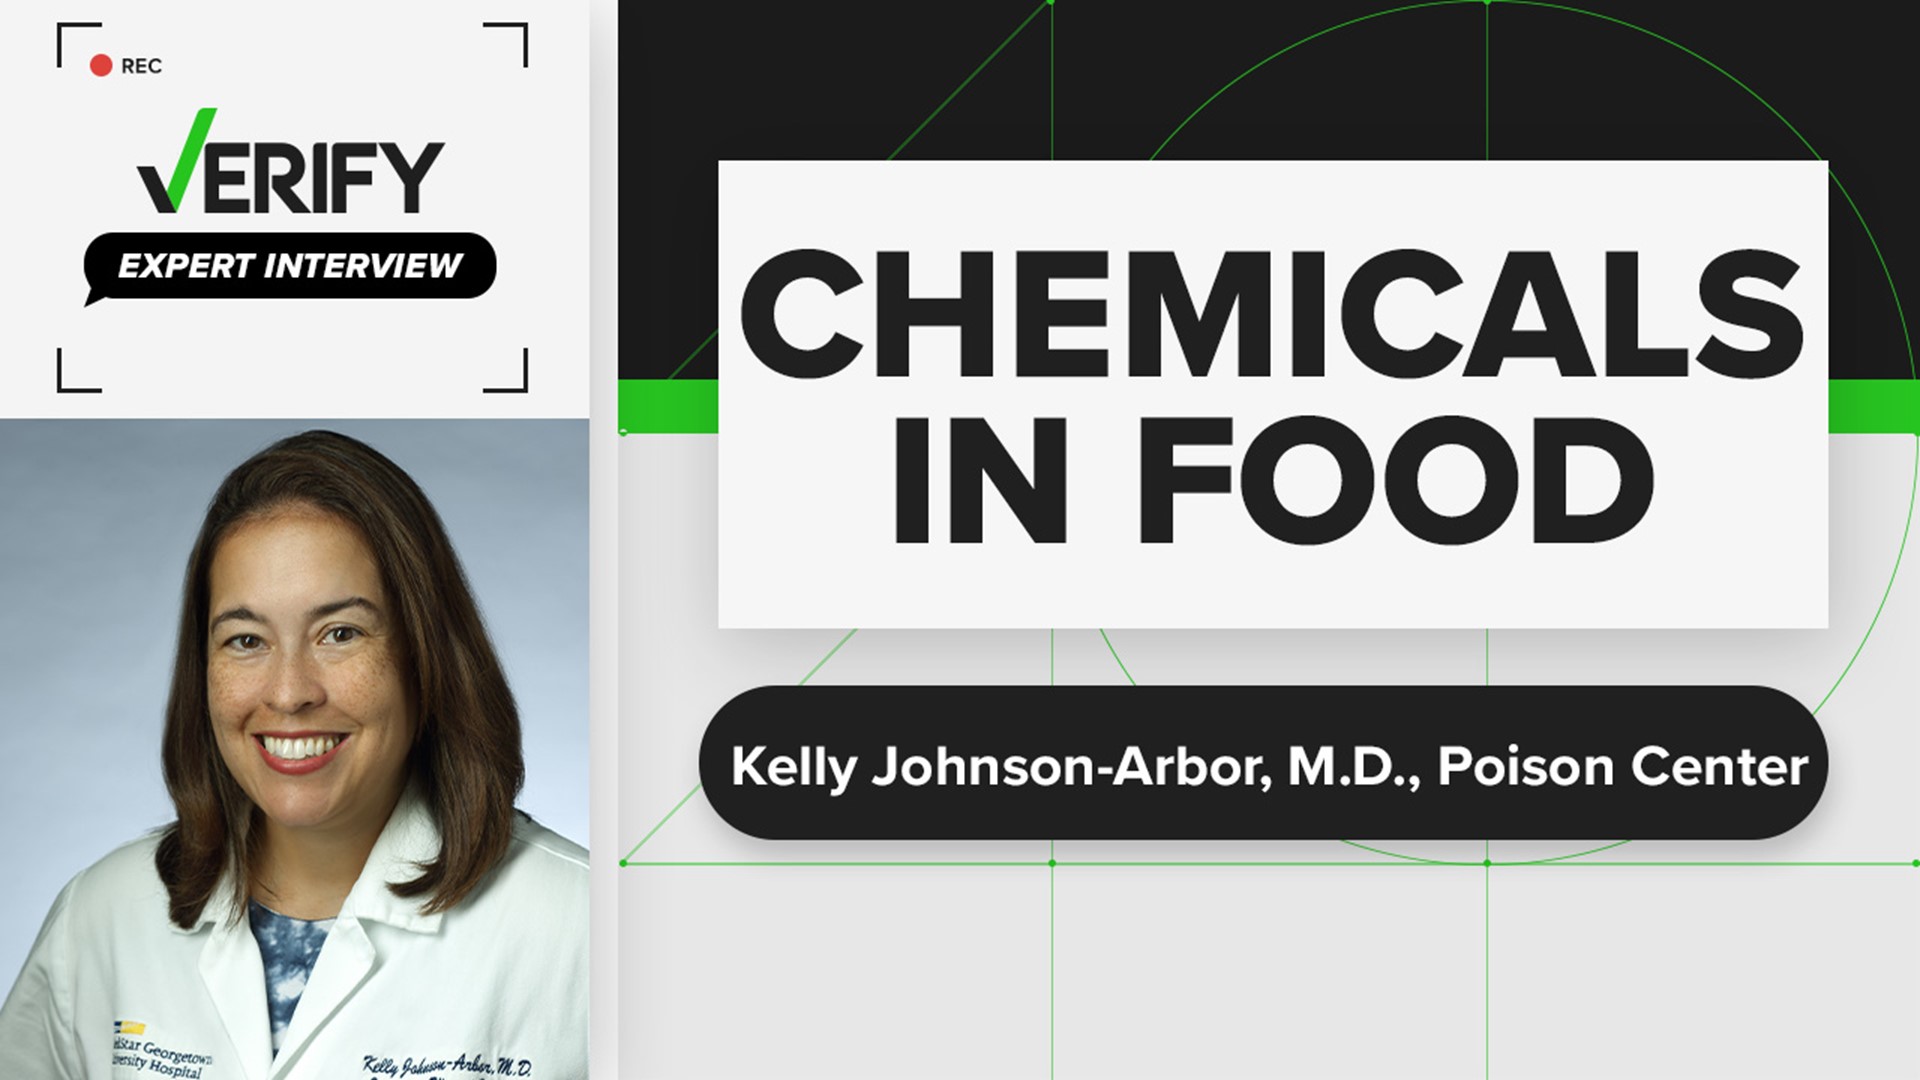 Medical Director, Kelly Johnson-Arbor, M.D., talks about the food chemical, titanium dioxide, that can be found in food products, and if it is harmful to humans